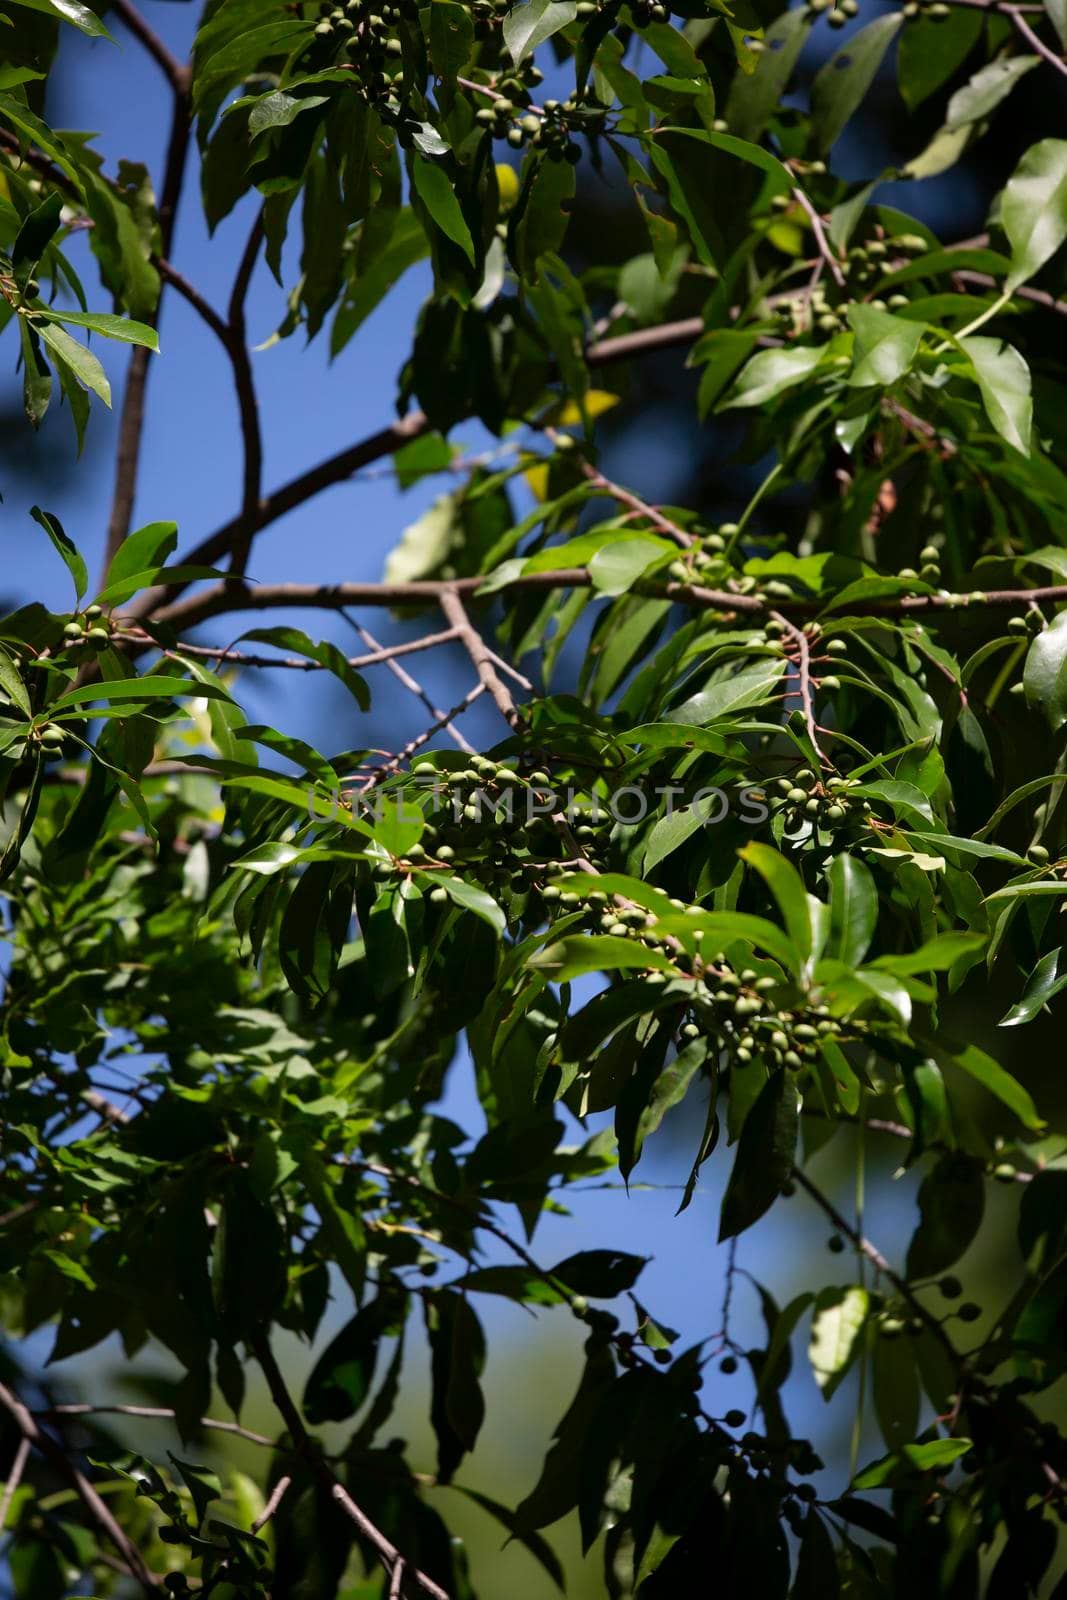 Green berries growing on a green, healthy bush